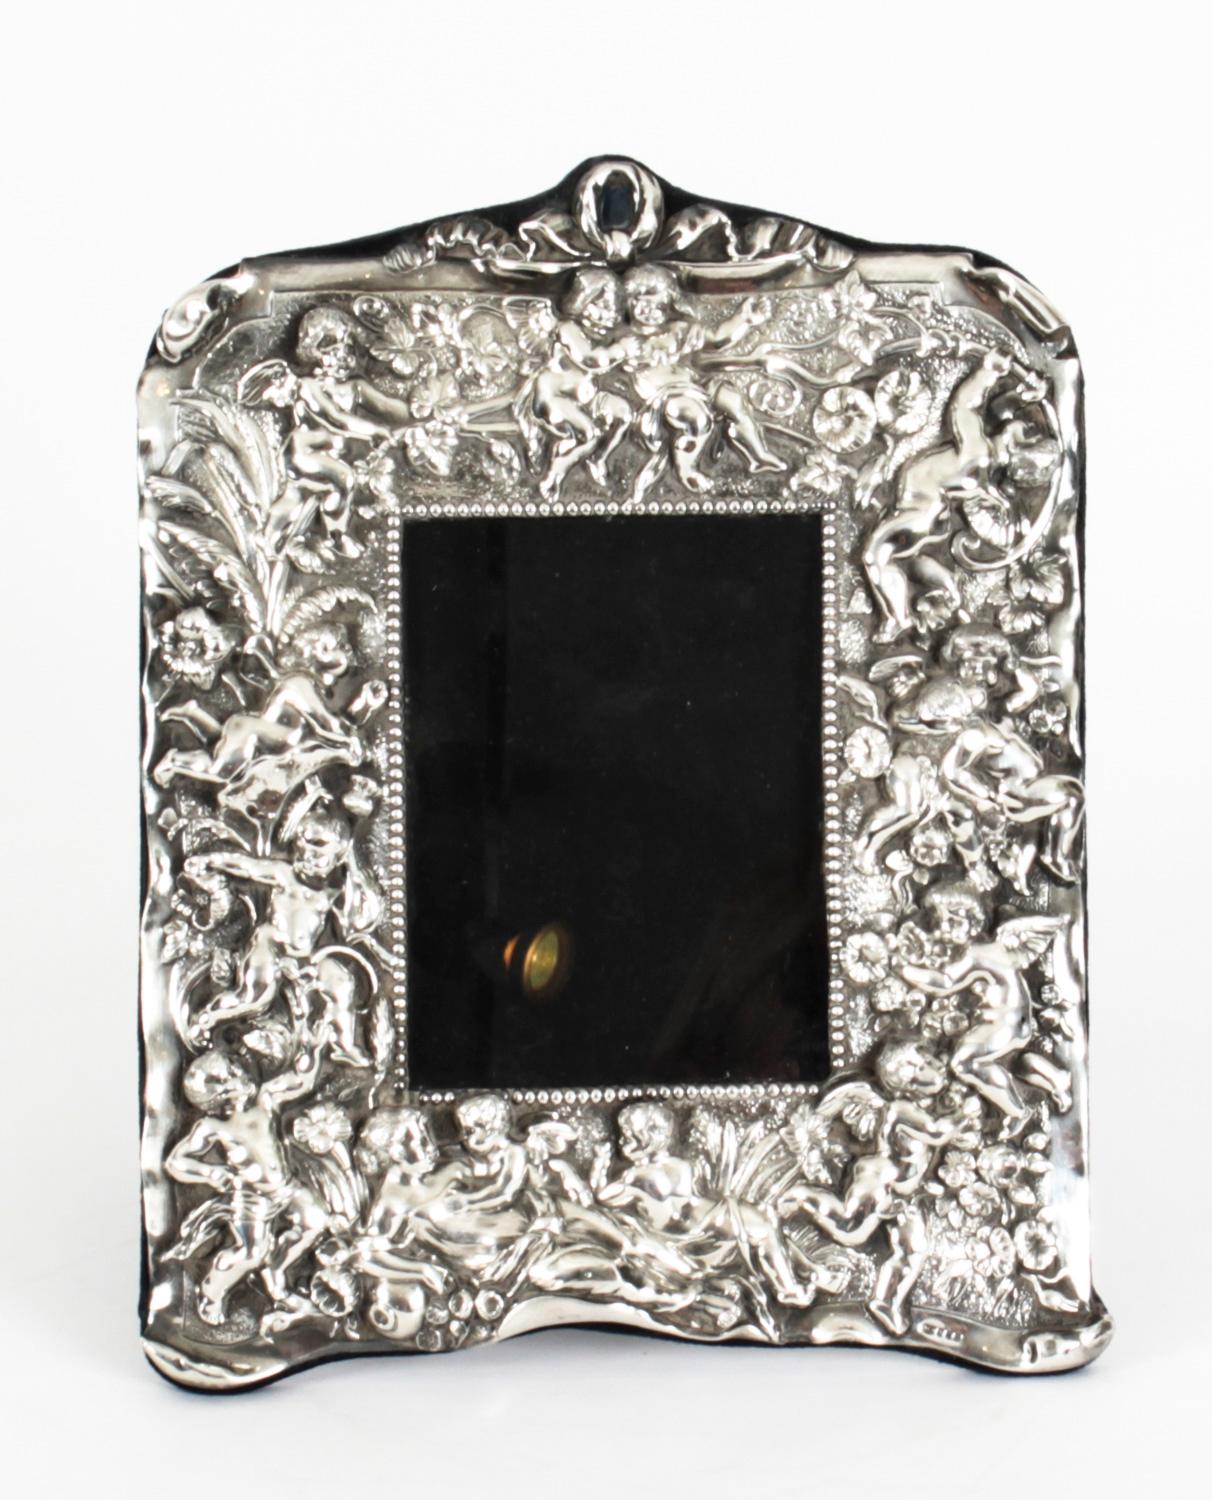 A truly superb vintage sterling silver photo frame with hallmarks and the makers mark of Neil Lasher Silverware, London and dated 1995.

The beautiful rectangular photo frame is superbly decorated with ribbons, flowers and winged cherubs in high